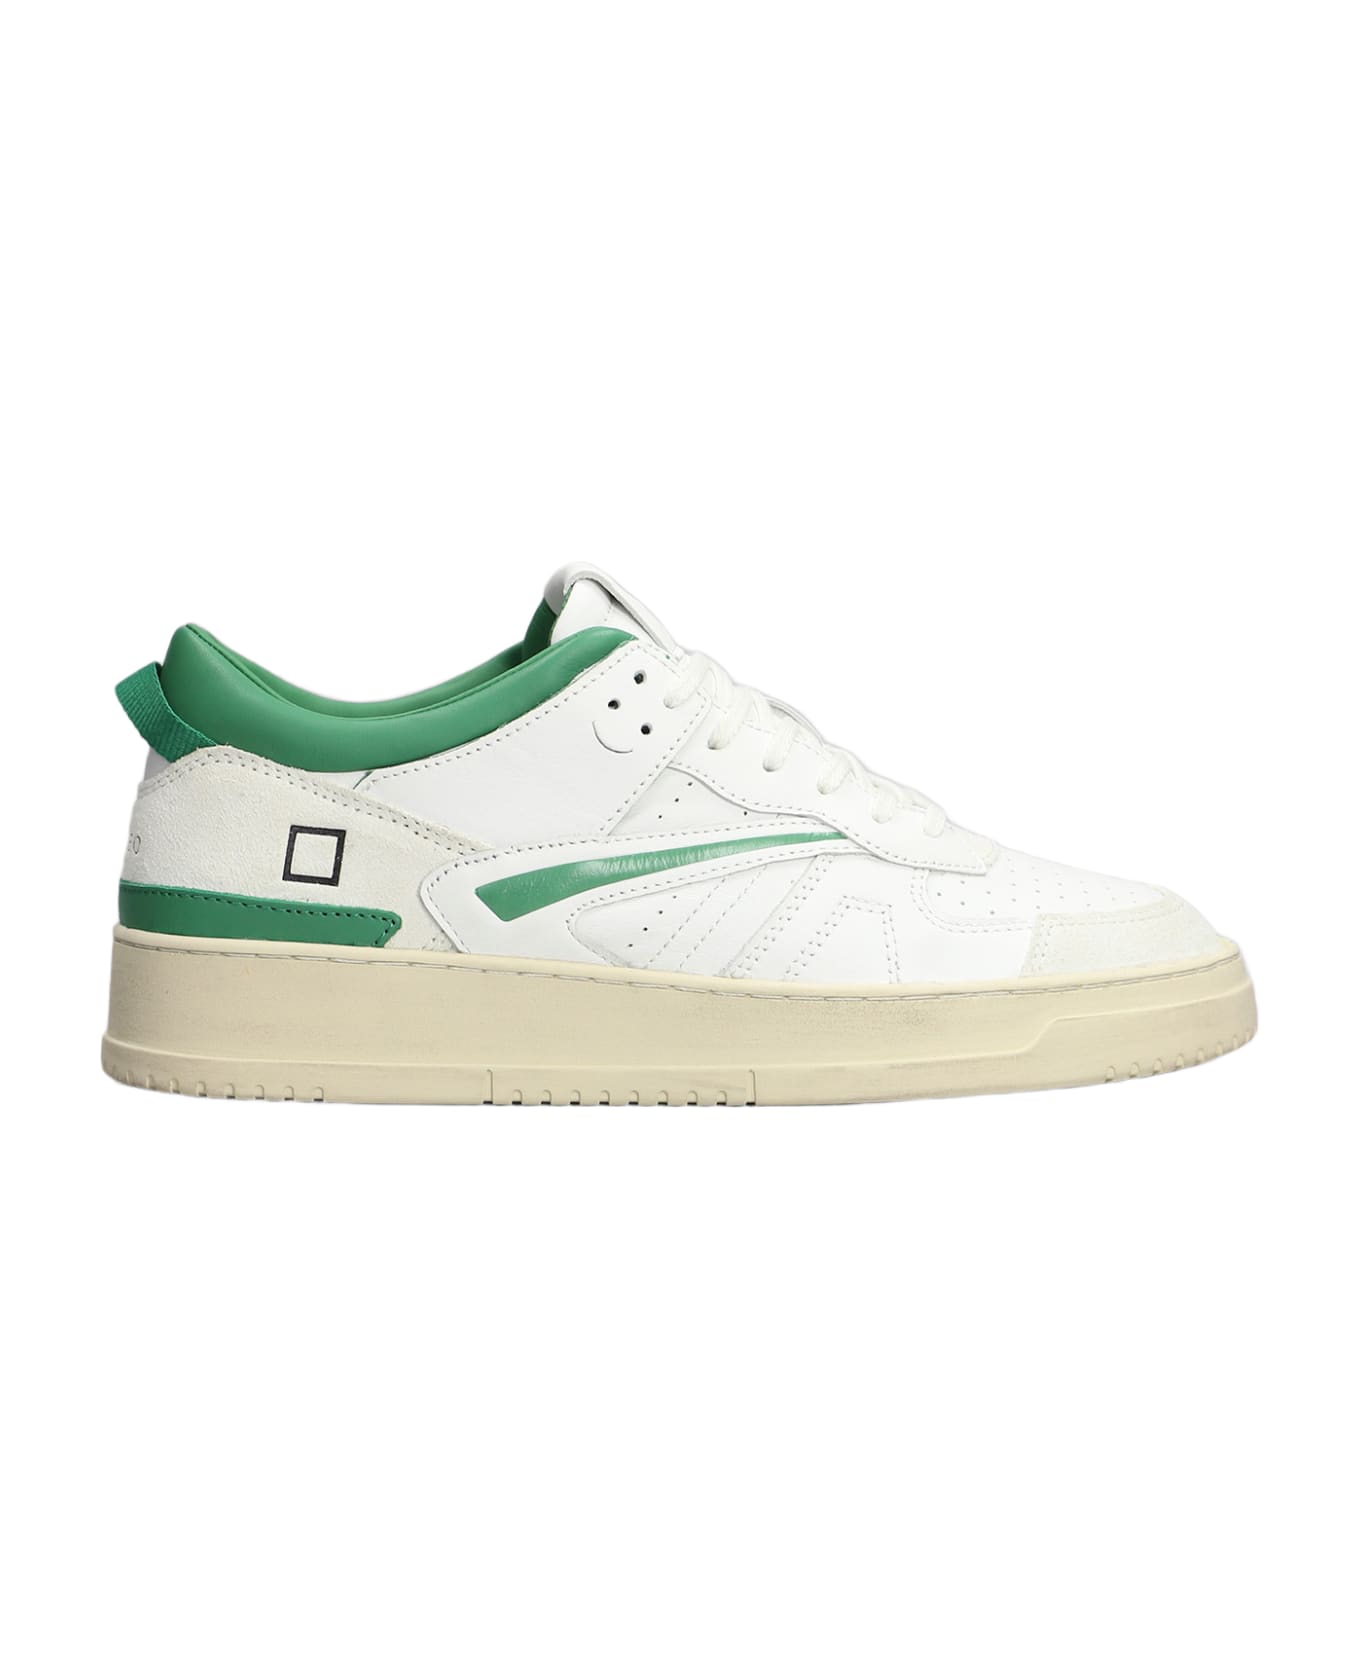 D.A.T.E. Torneo Sneakers In White Leather - white